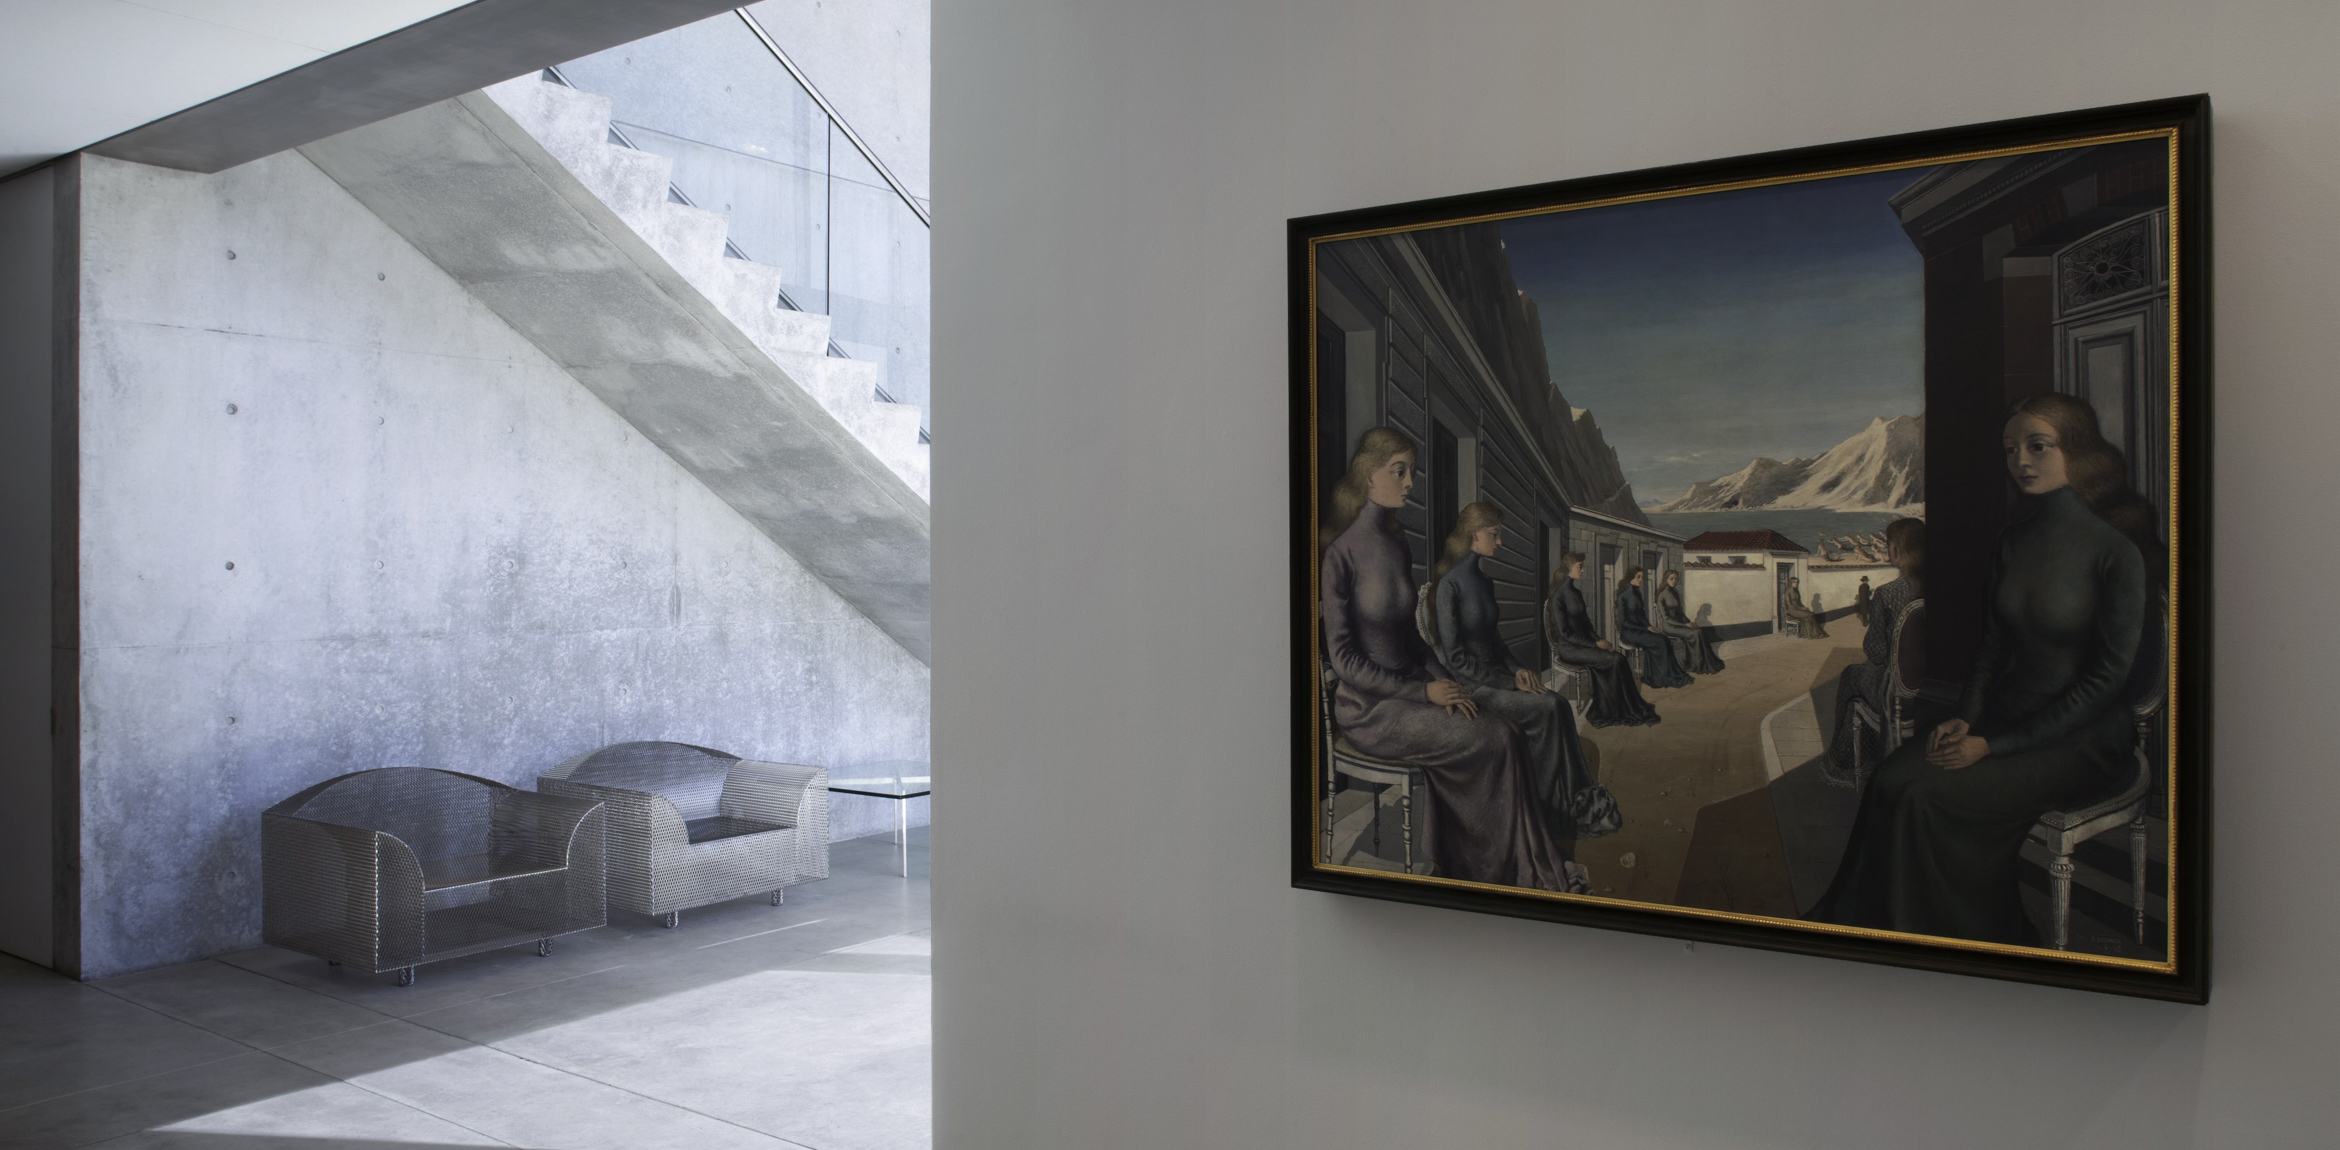 View of Paul Delvaux's "Village of the Mermaids" in the Entrance Gallery. The painting depicts women sitting in a row leading to a mountain seaside view.